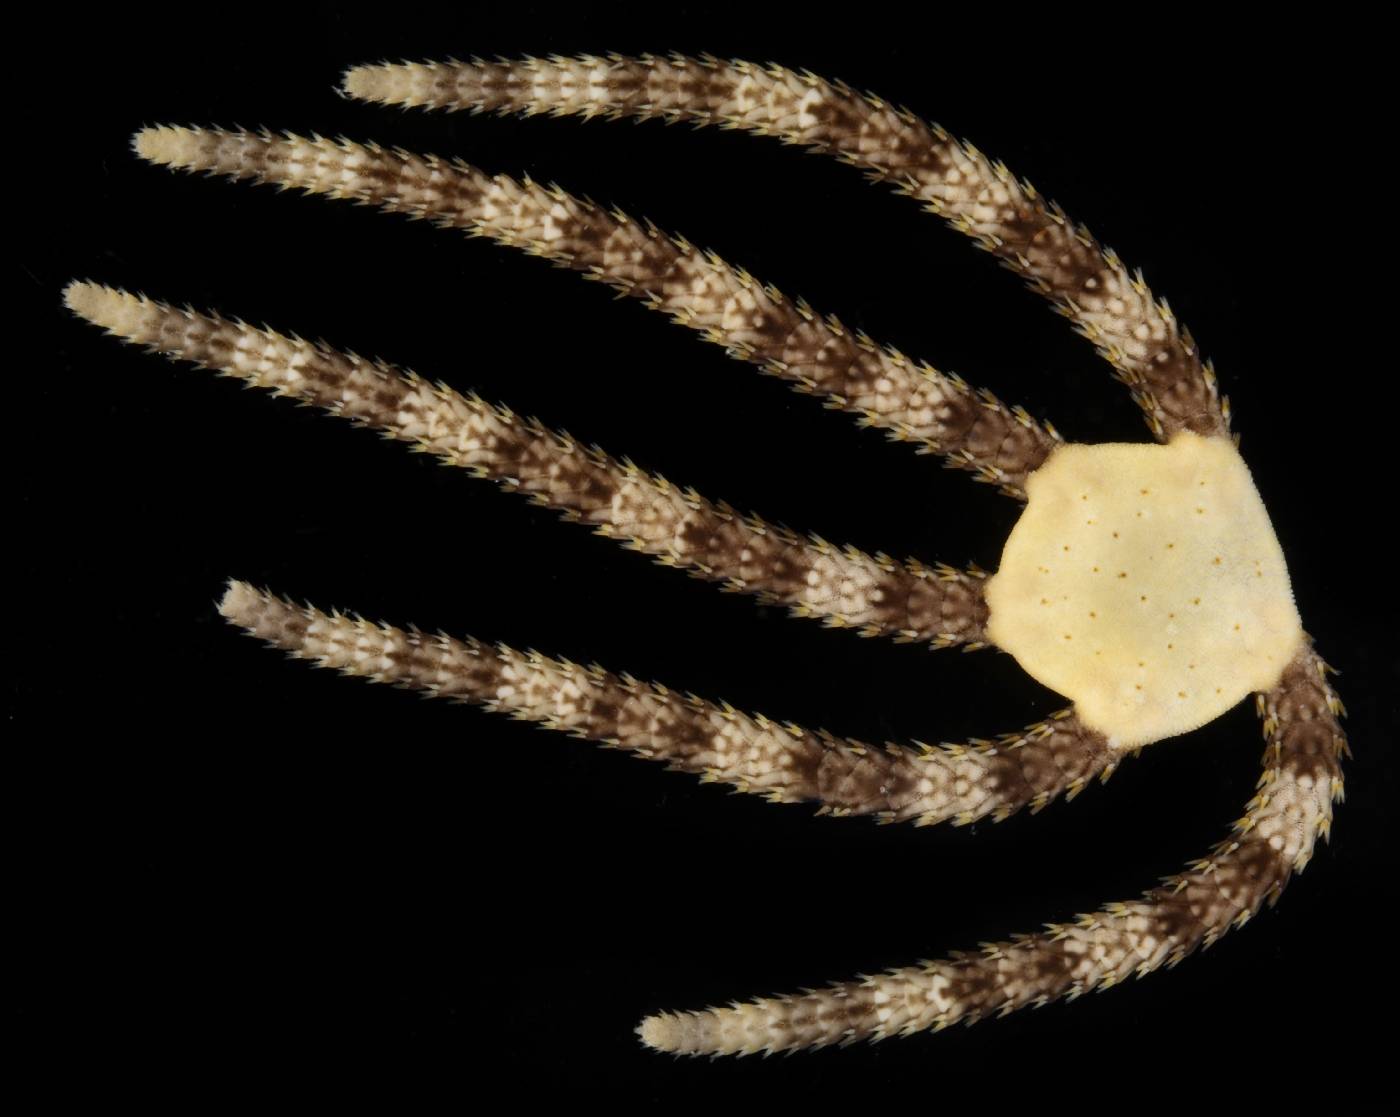 Ophioderma image